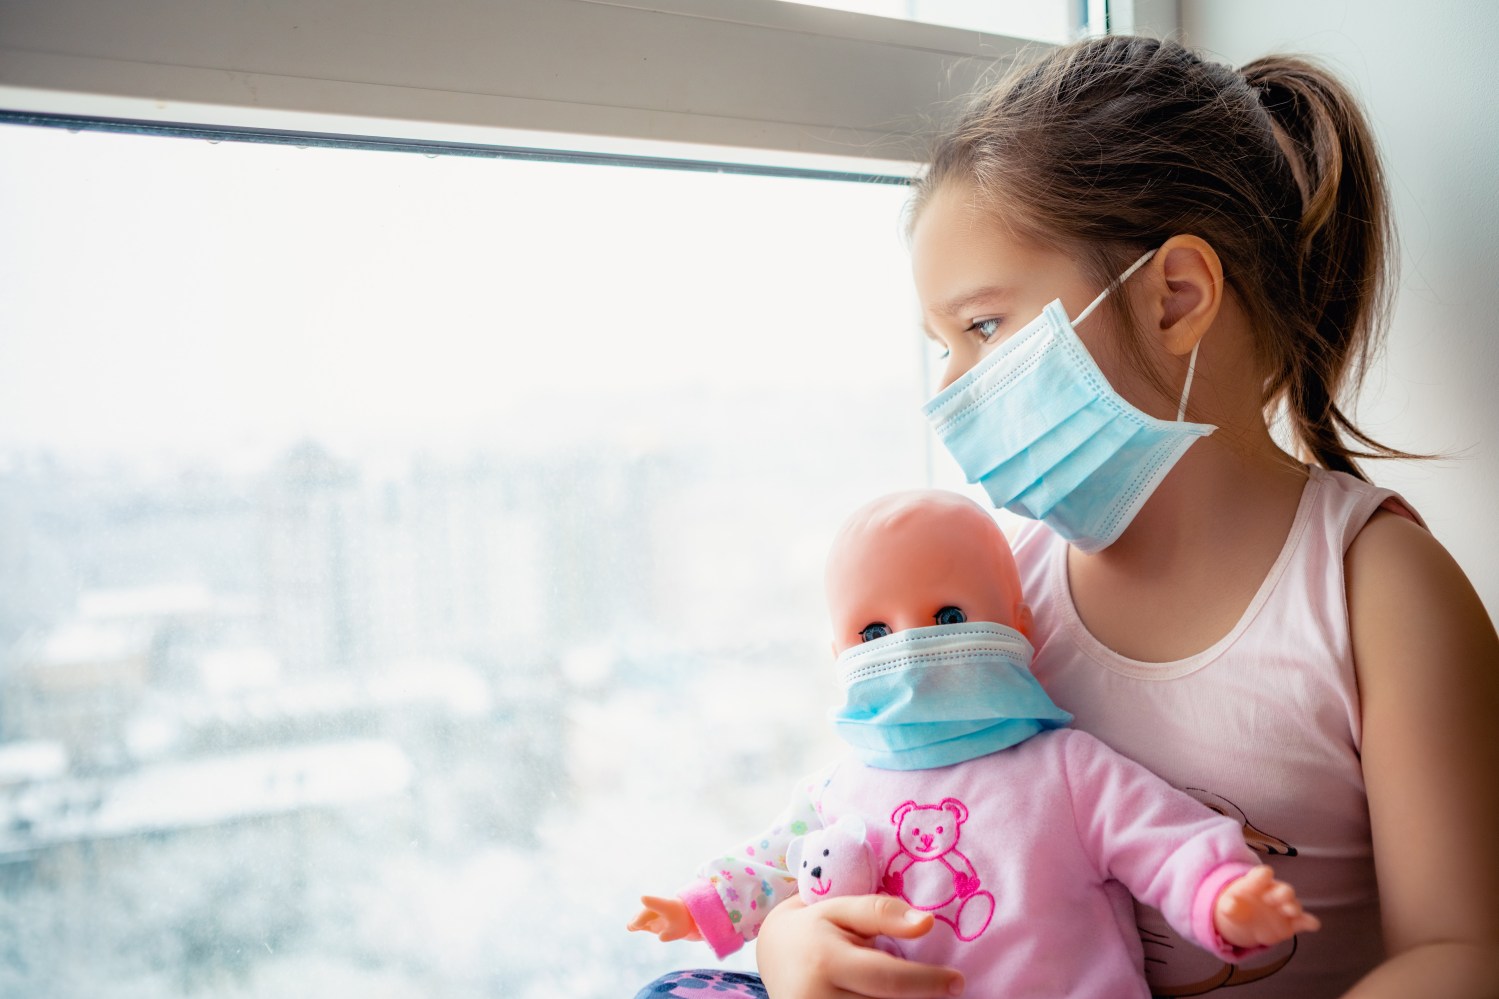 Little girl holding a doll and looking out a window wearing surgical masks.